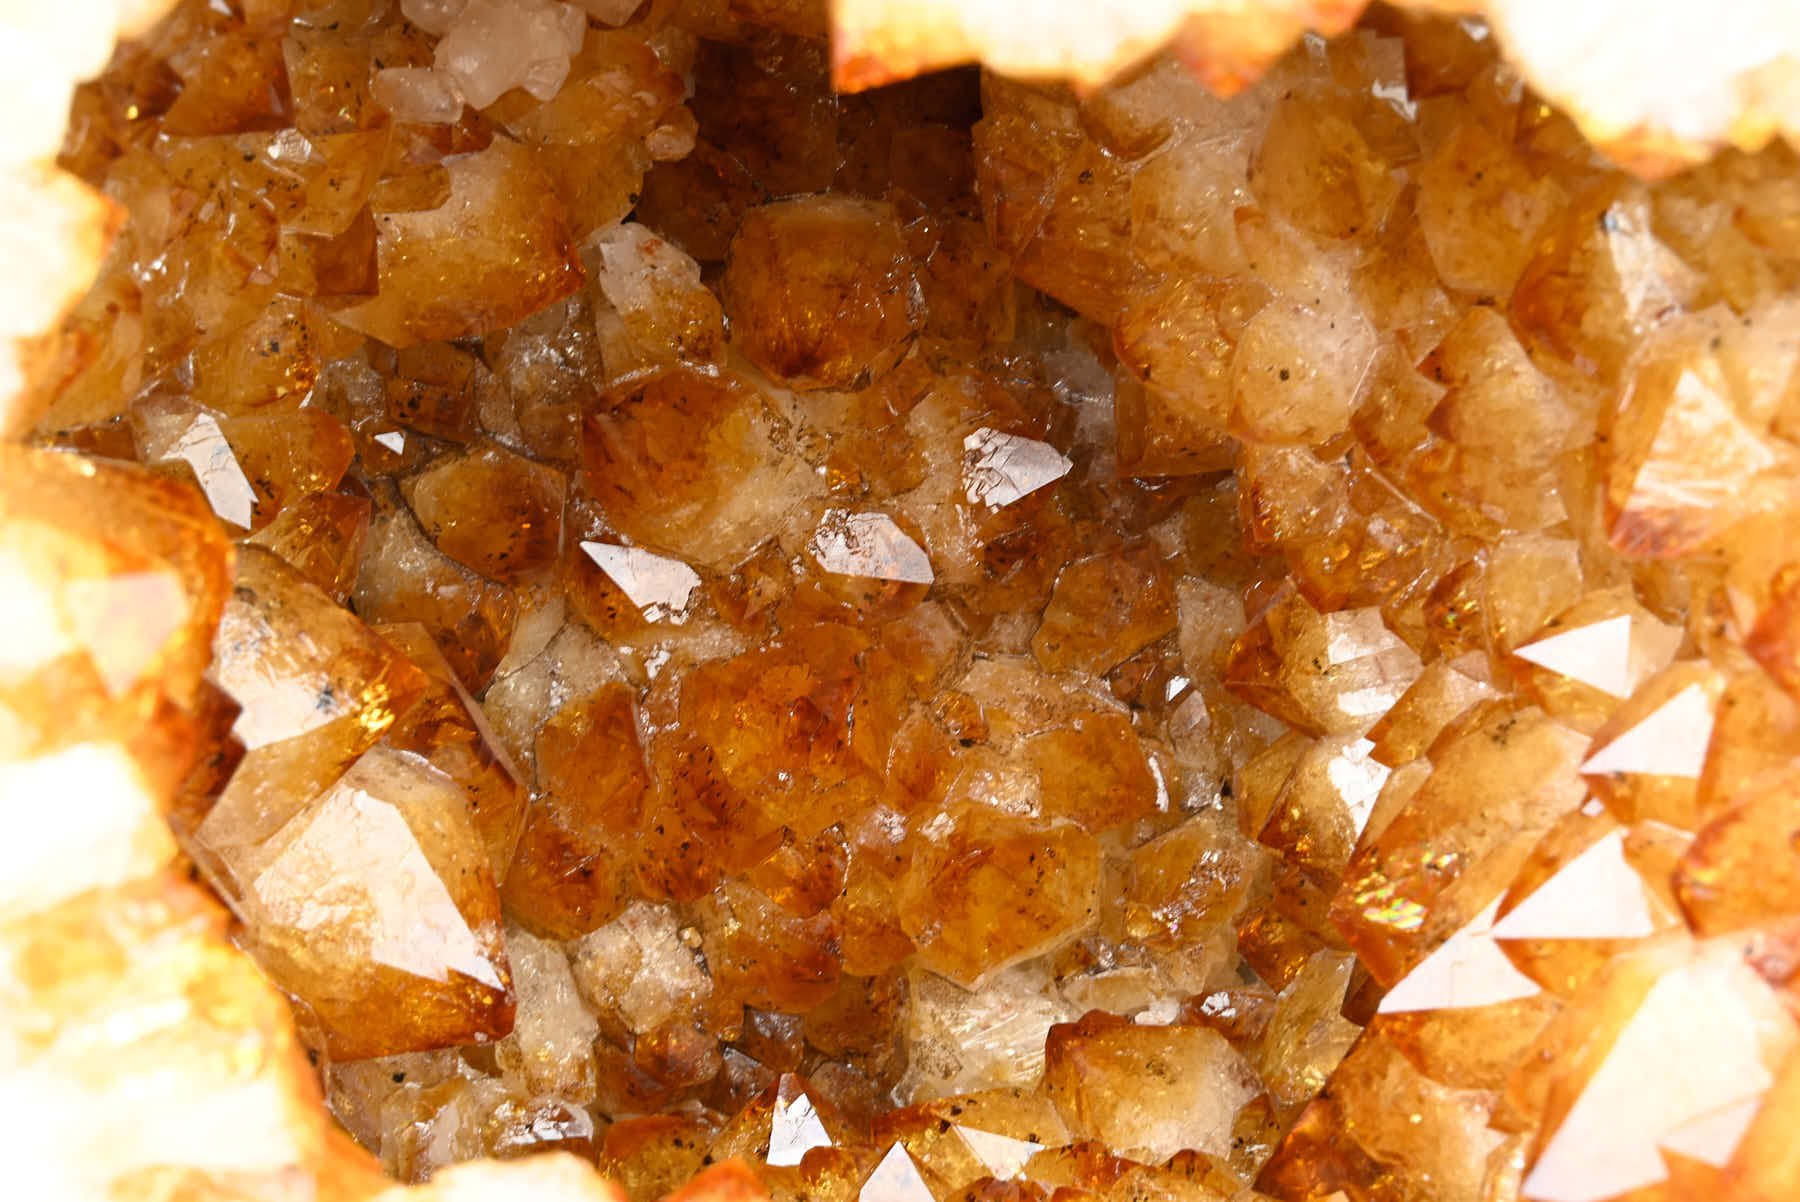 Extra Quality Citrine Cathedral - 7.18kg, 19cm tall - #CACITR-10003